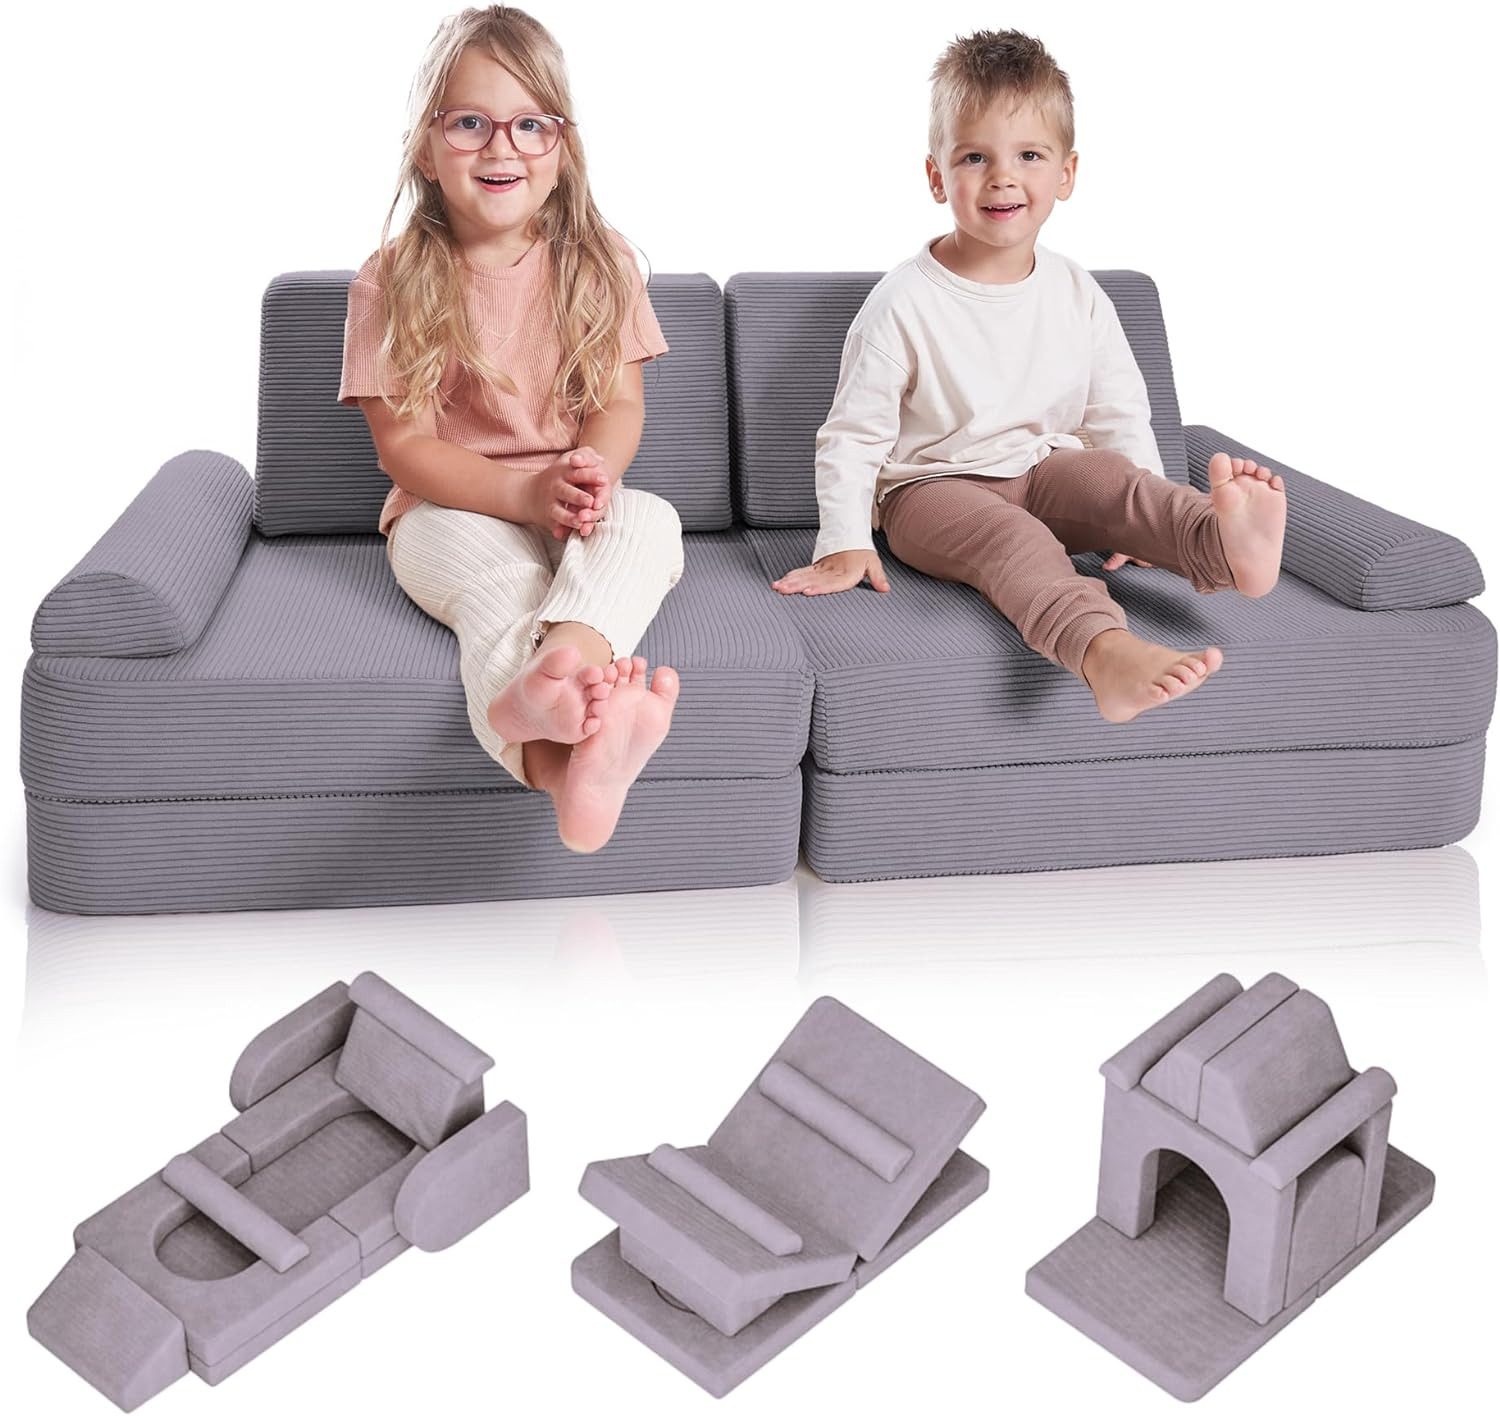 ZICOTO Modular Kids Play Couch for Fun Play Time or Comfy Lounging - the Perfect